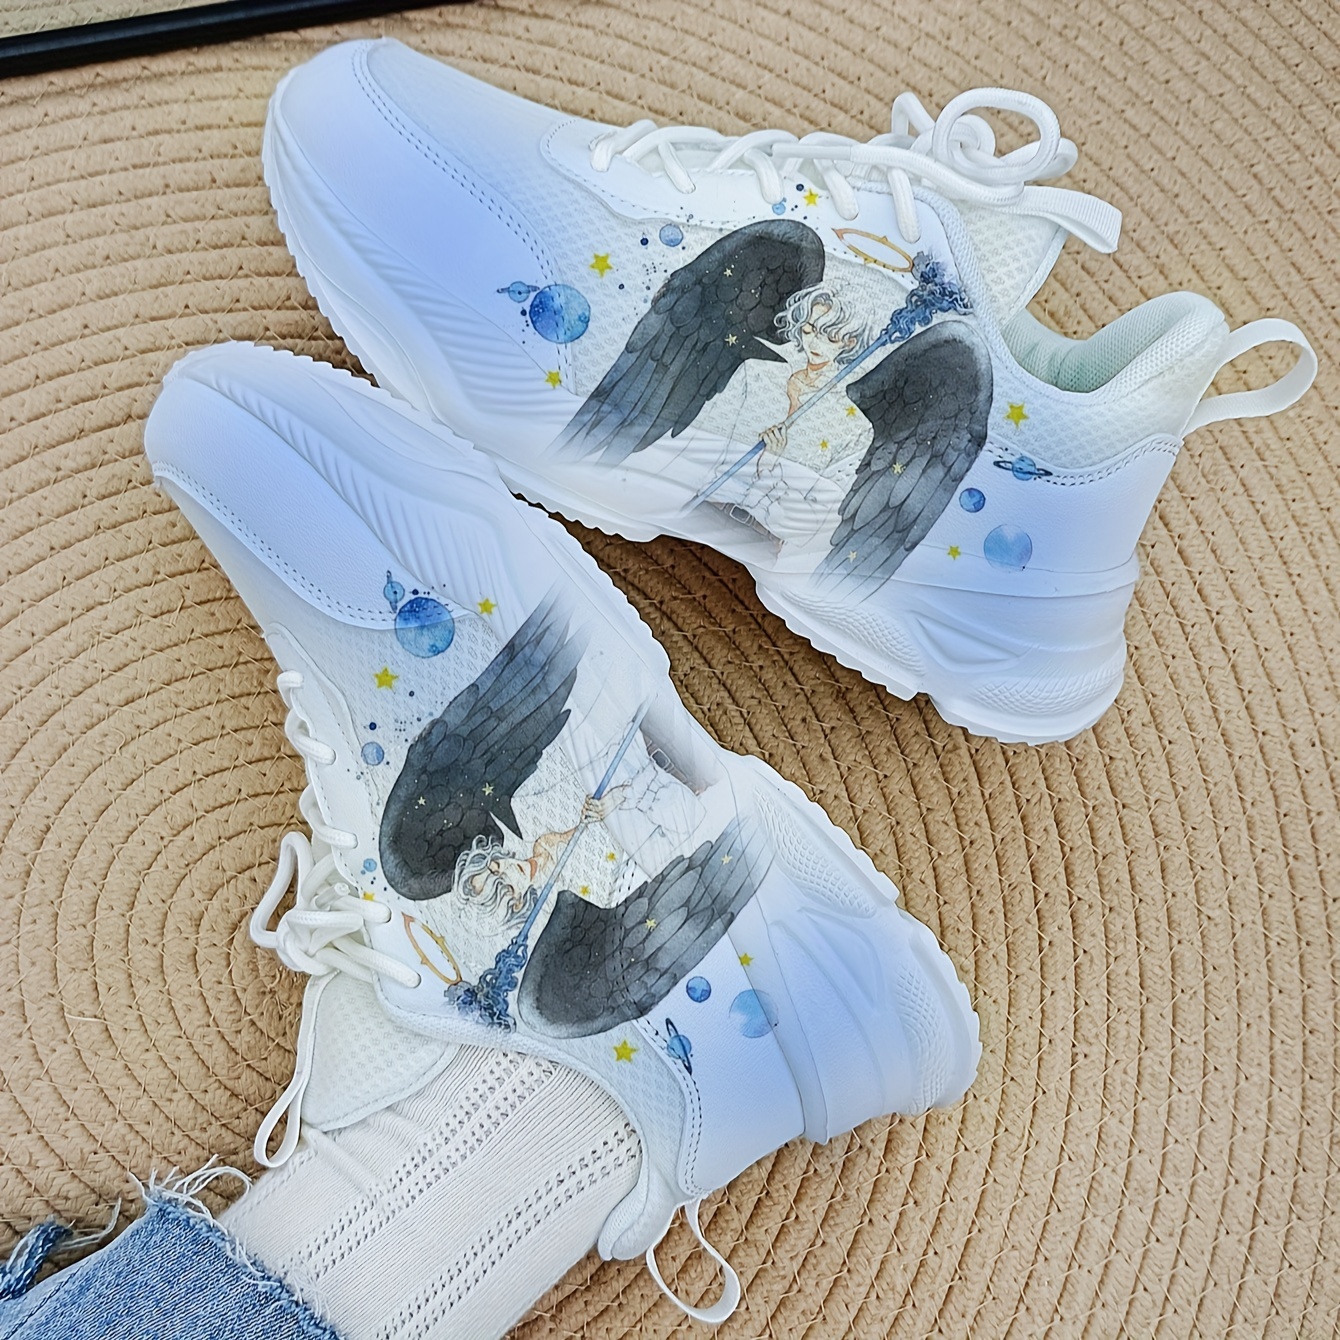 Women Nike air max 270 with custom buttery blue